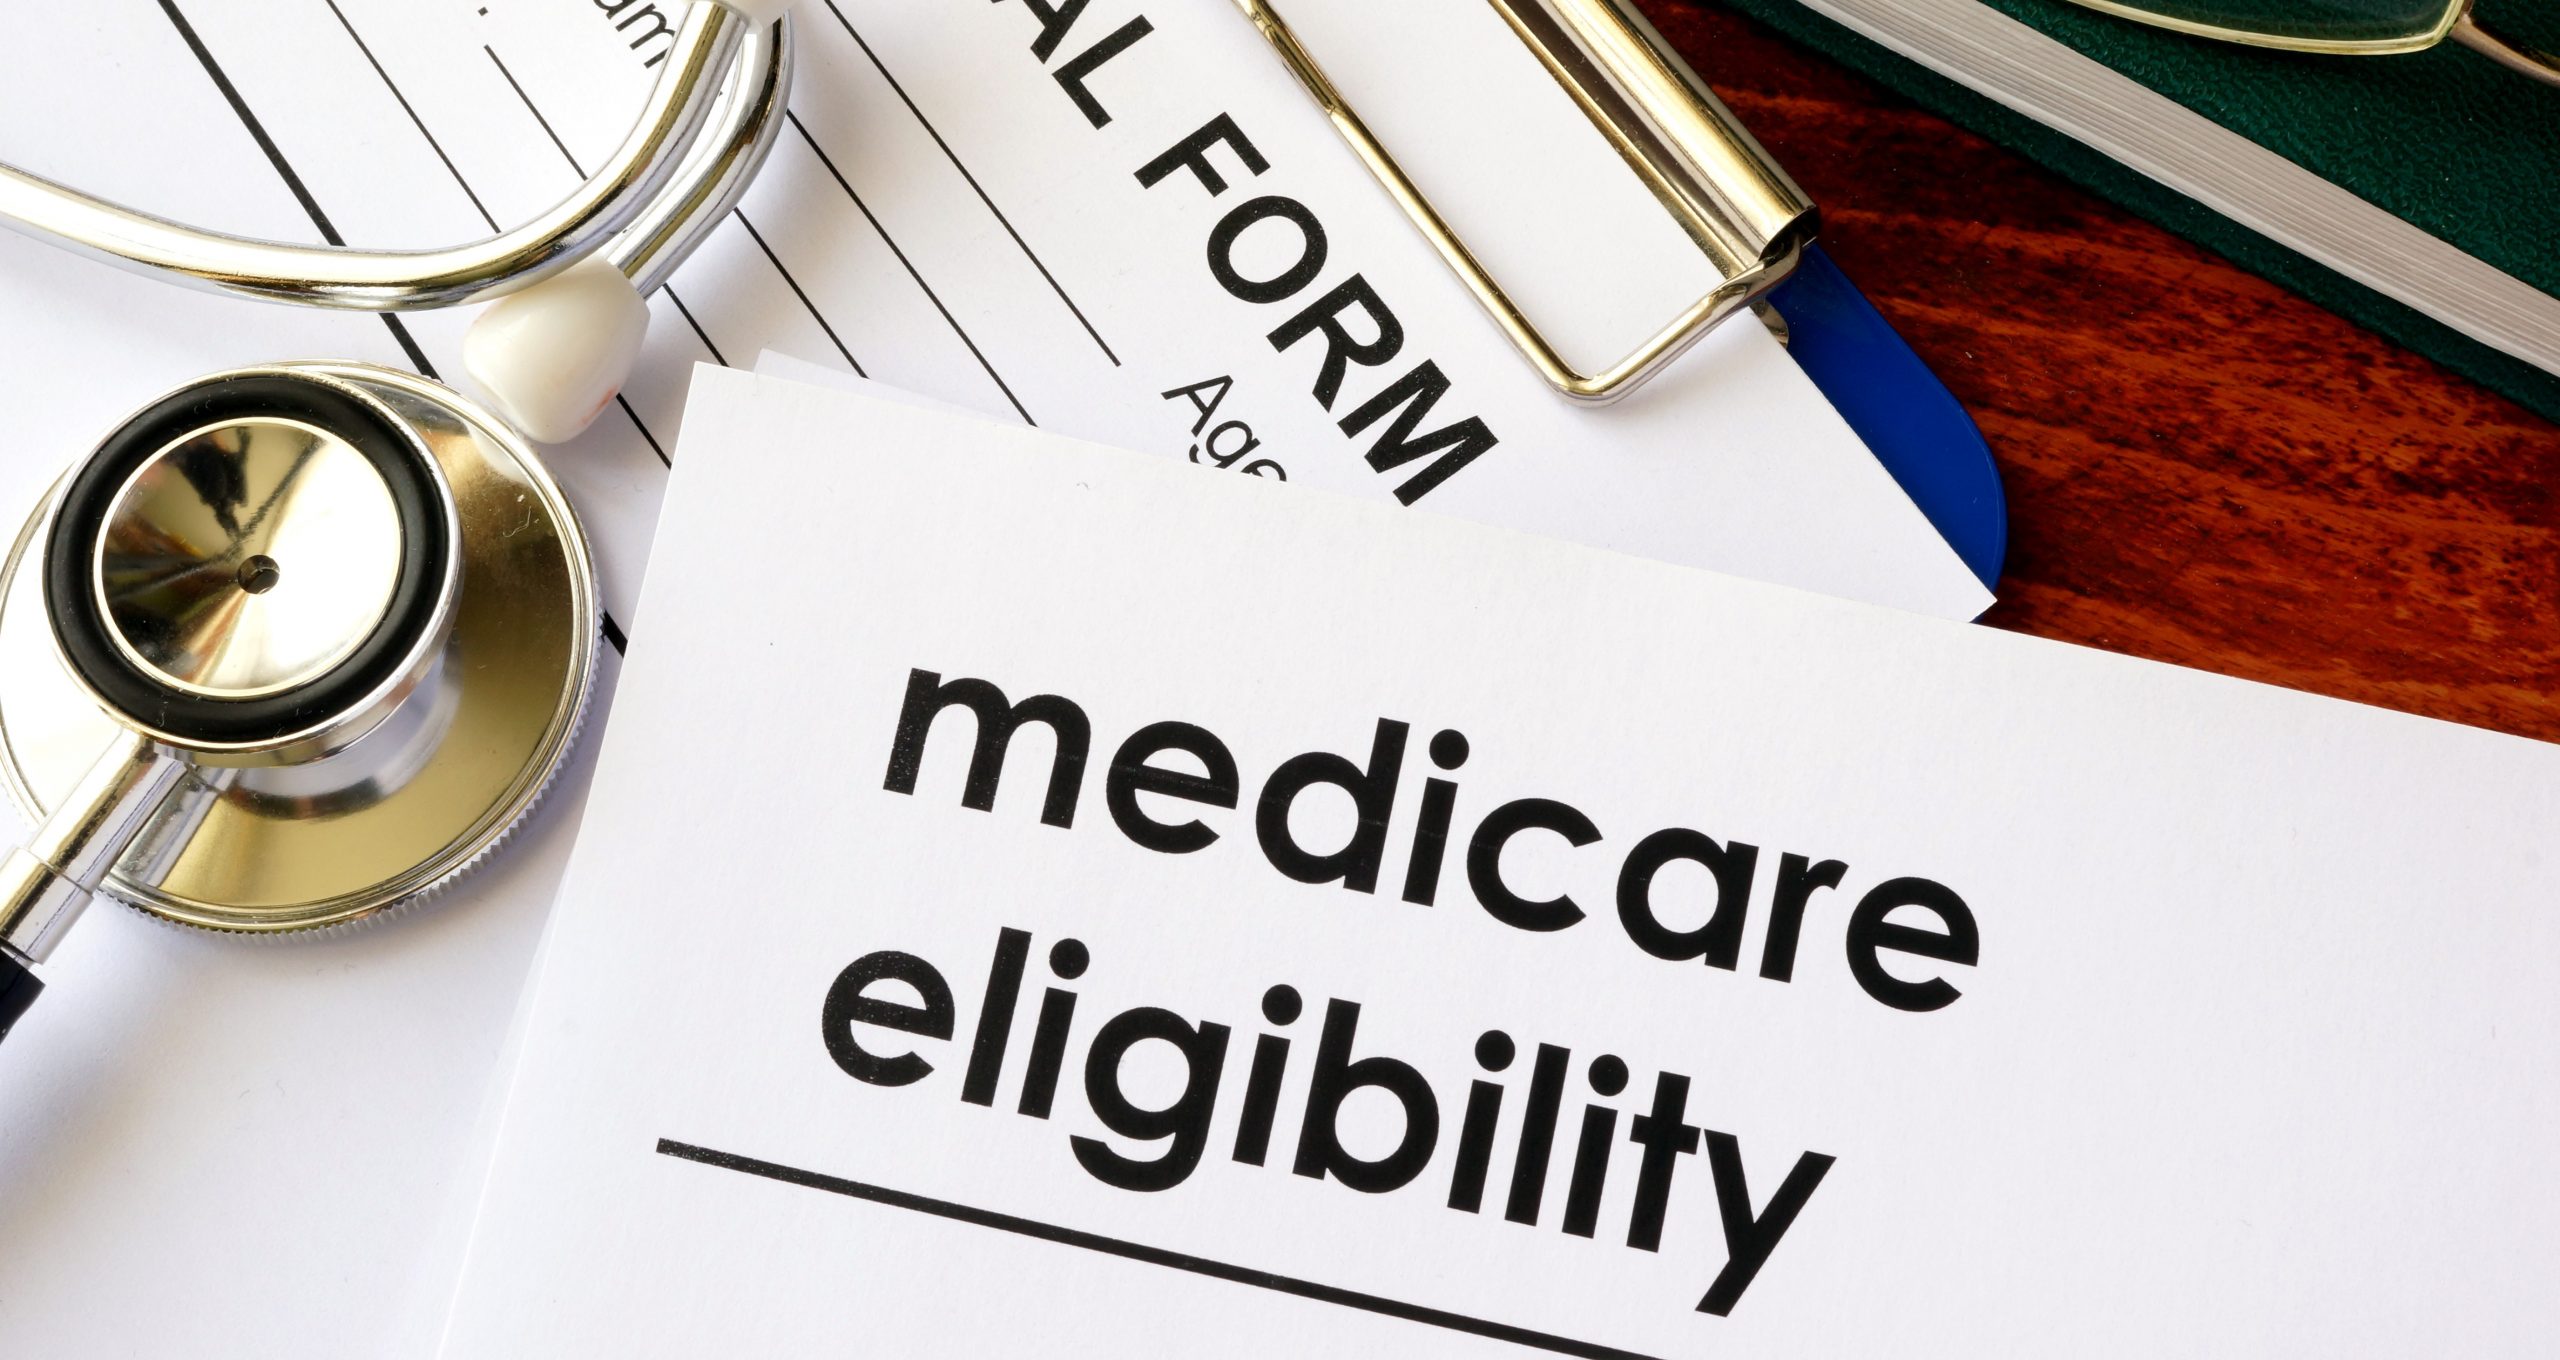 Medicare Eligibility: Find Out if You Can Enroll This Year